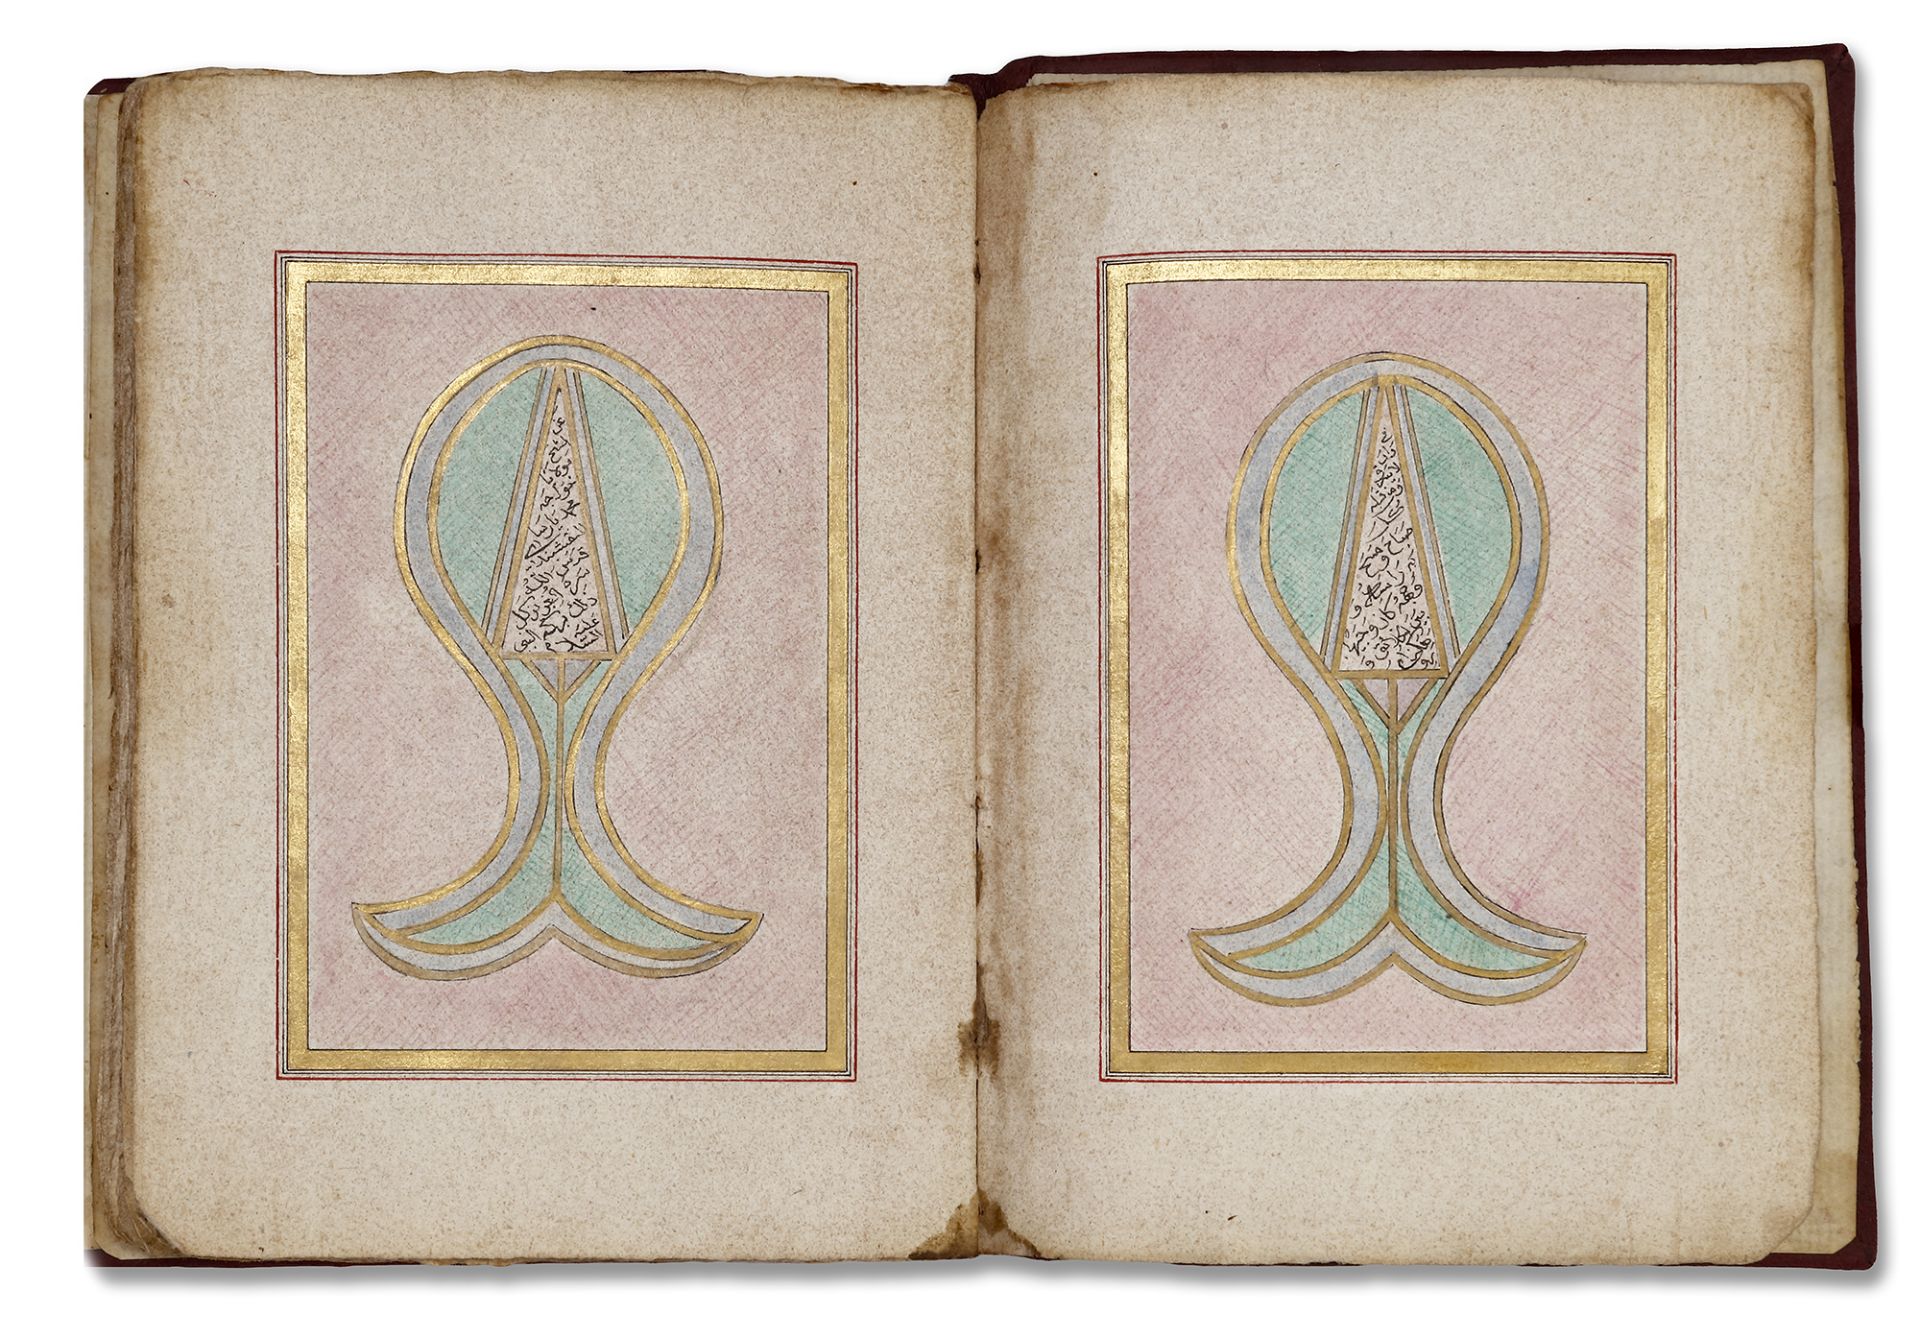 AN OTTOMAN COMPILATION OF PRAYERS AND HOLY PLACES BY ABD AL-QADIR HUSRI, OTTOMAN TURKEY, DATED 1181 - Image 4 of 12